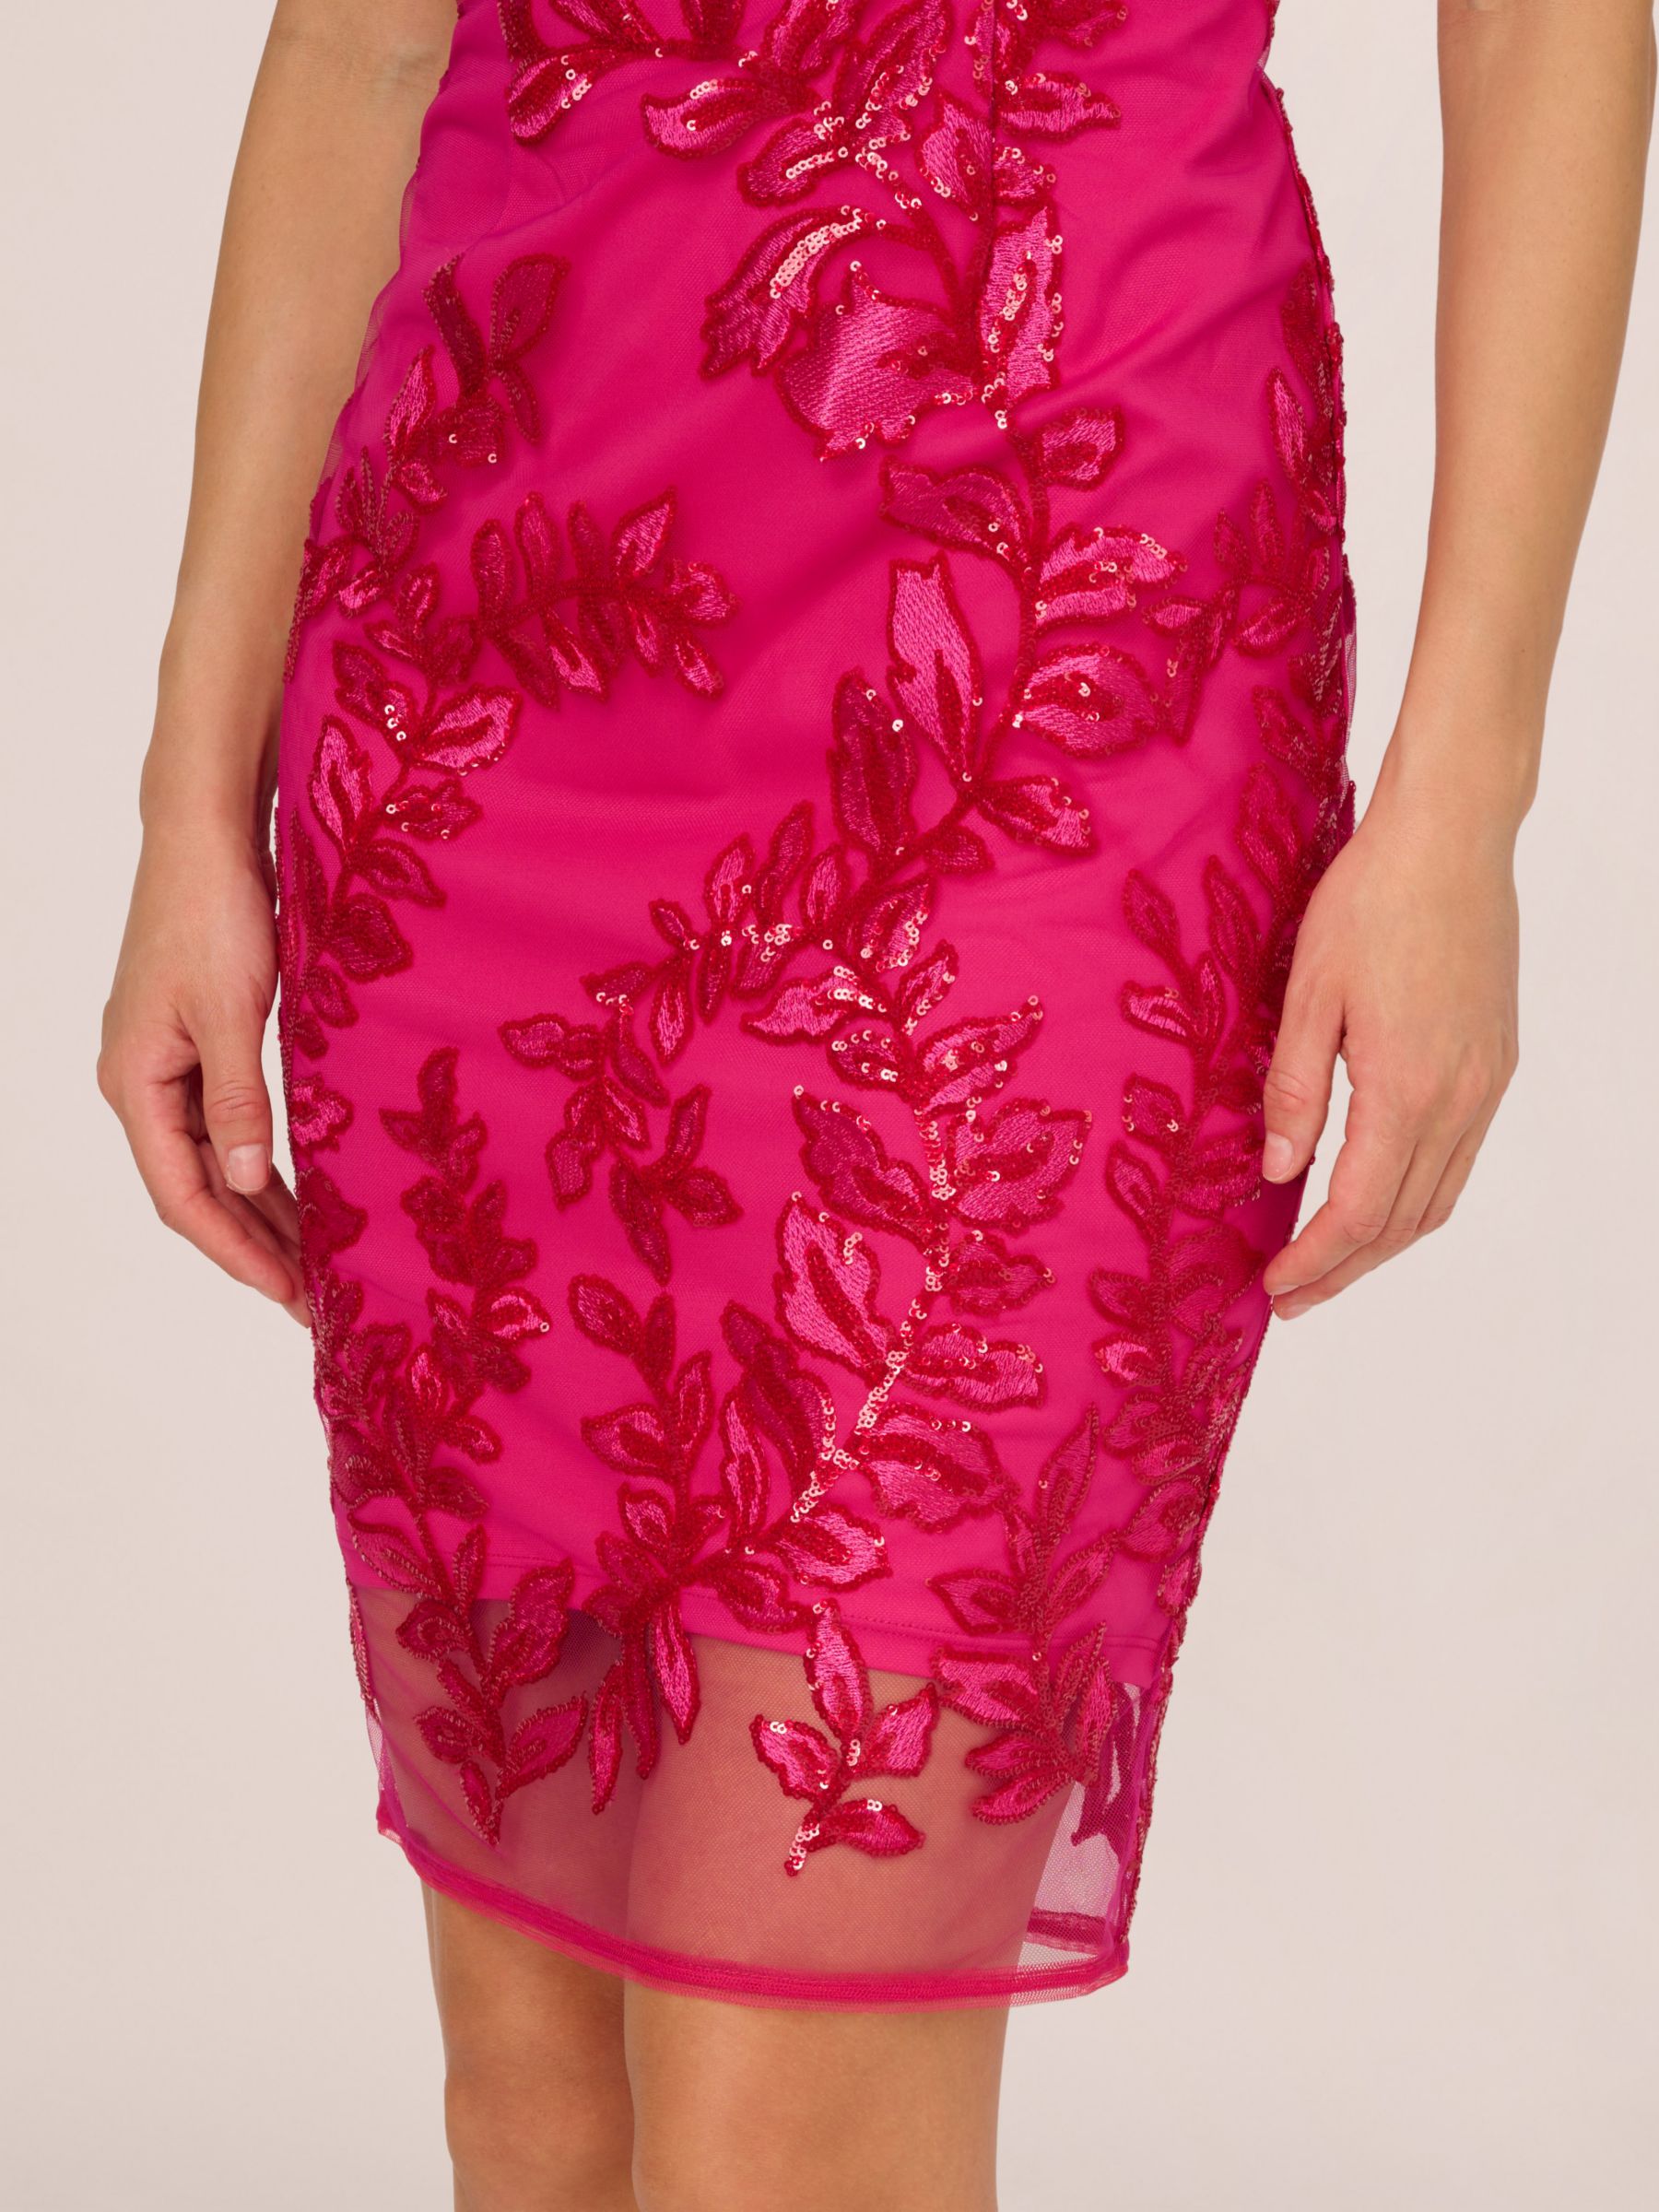 Buy Adrianna Papell Sequin Leaf Sheath Dress, Hot Pink Online at johnlewis.com